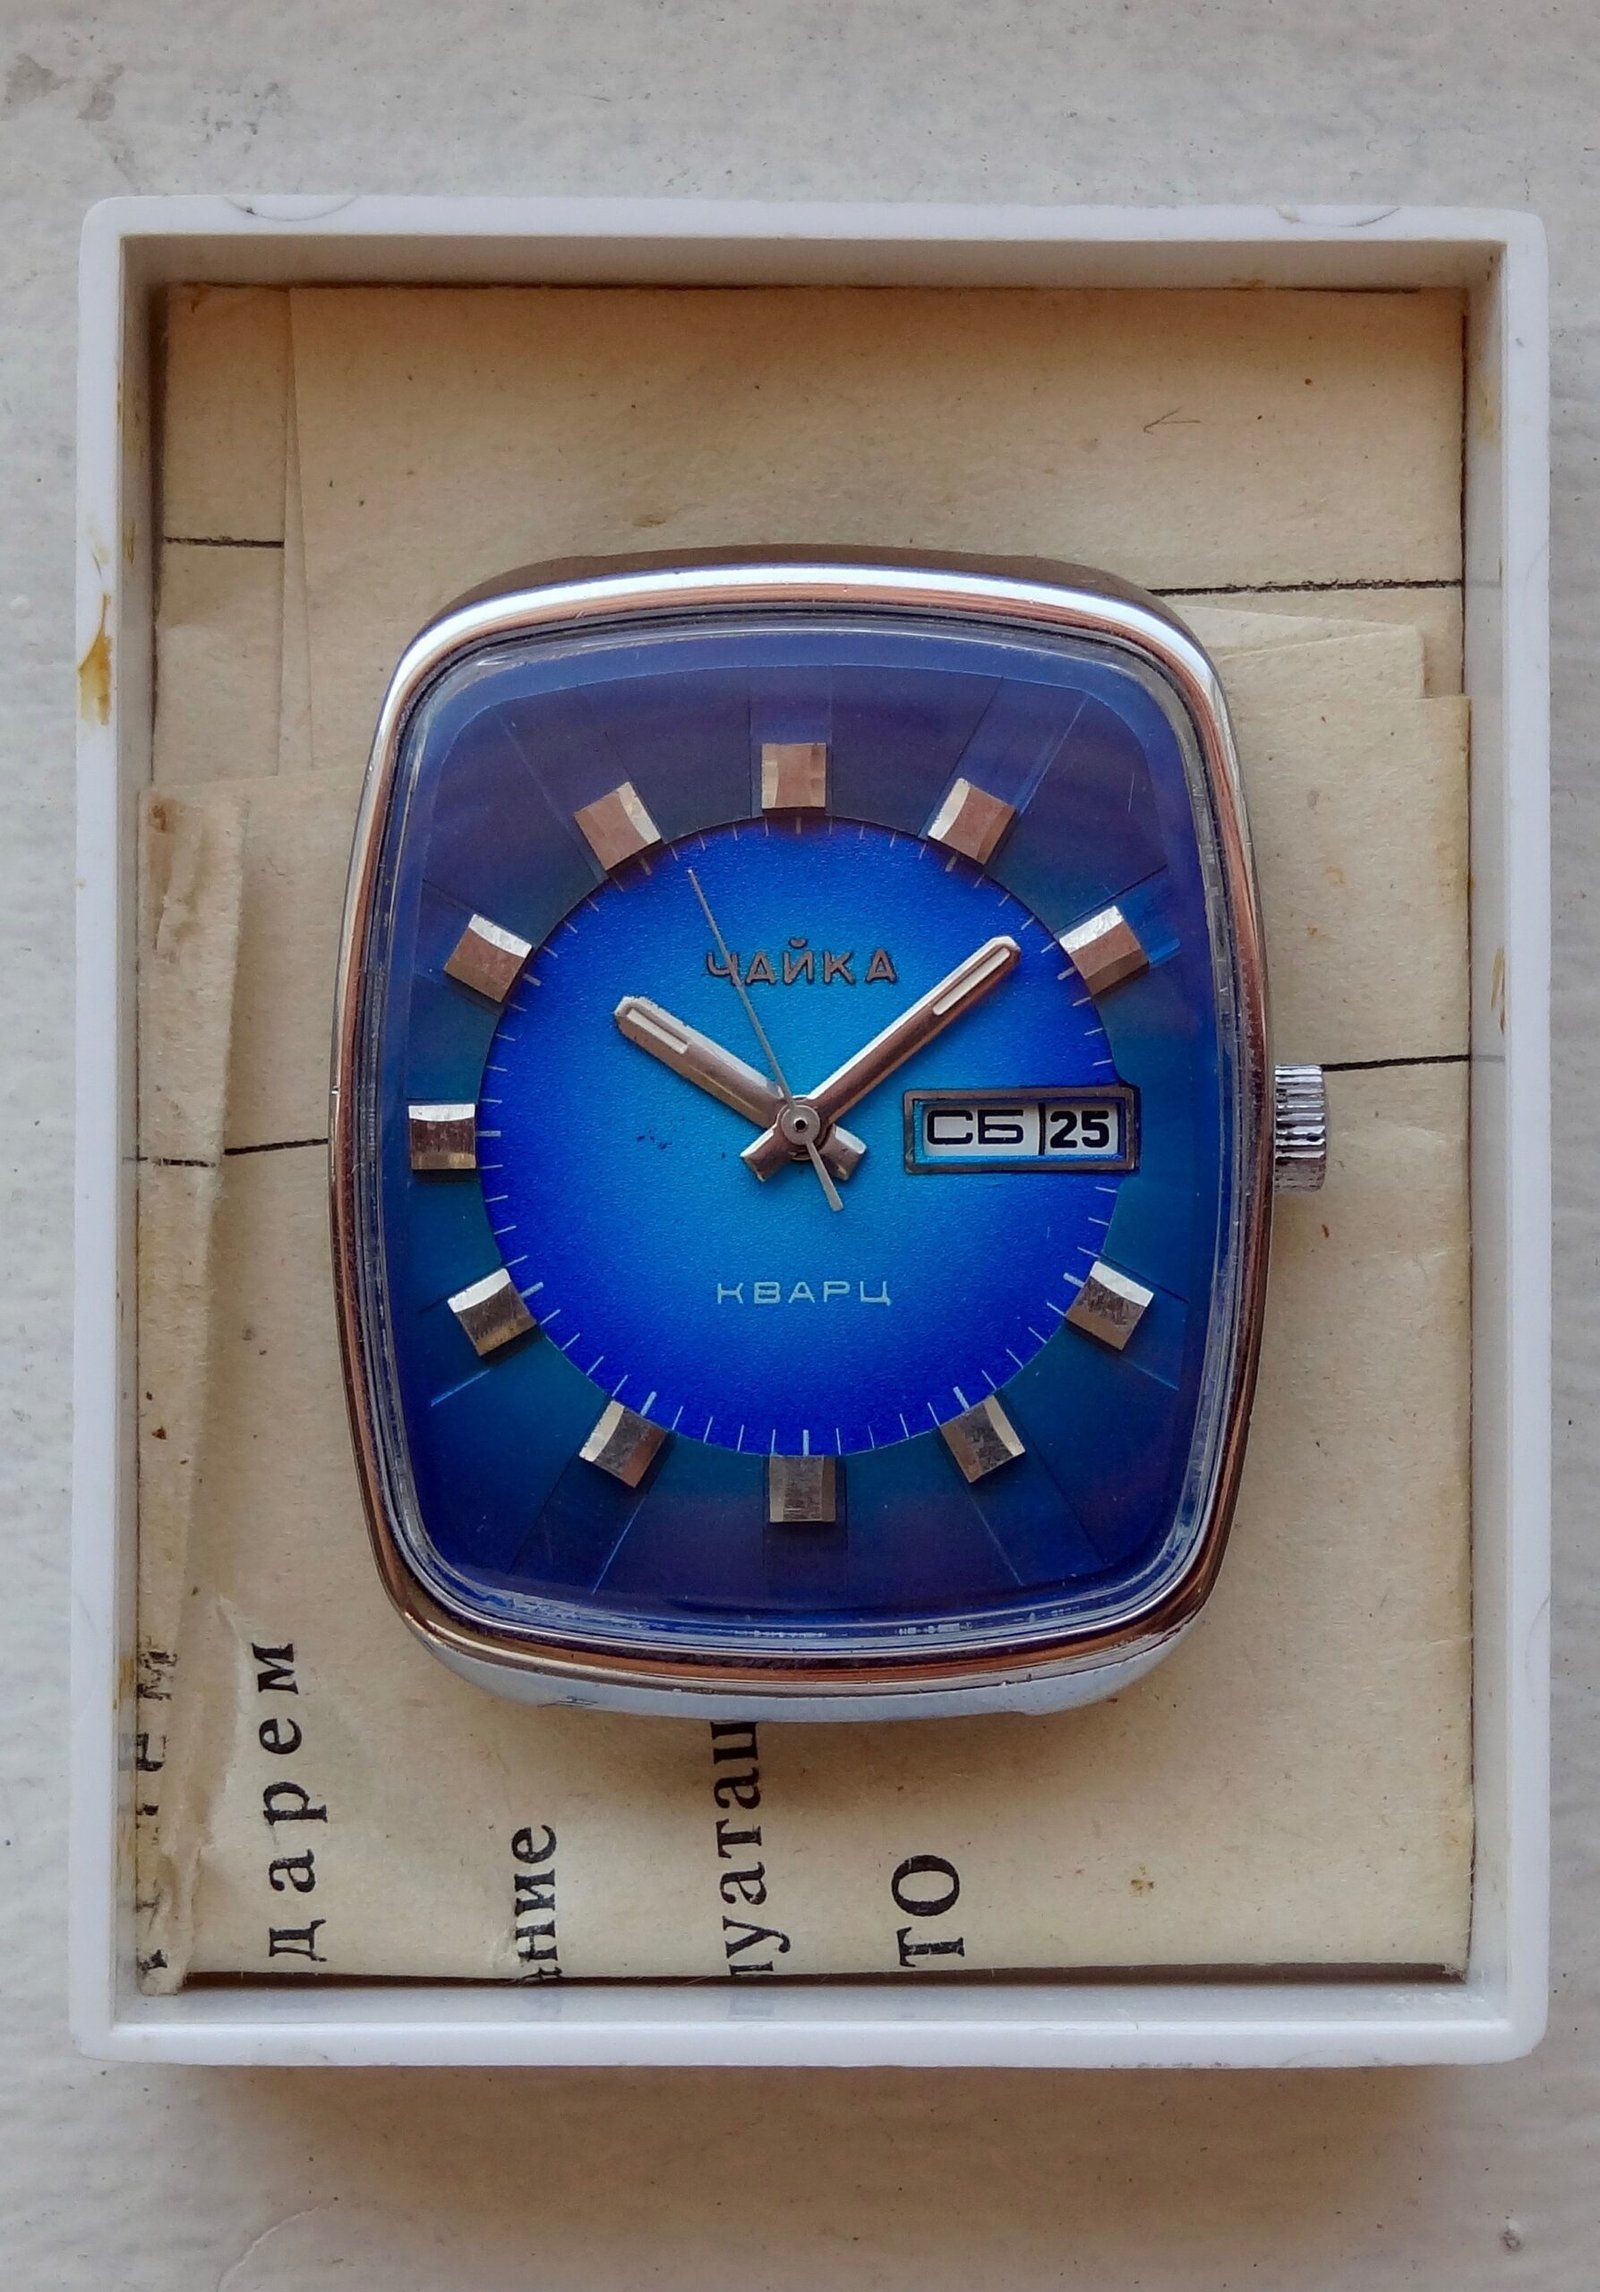 A first quartz watch Chaika 3050 of Soviet union. (Courtesy: Dashiell Stanford; https://mroatman.wixsite.com/watches-of-the-ussr)